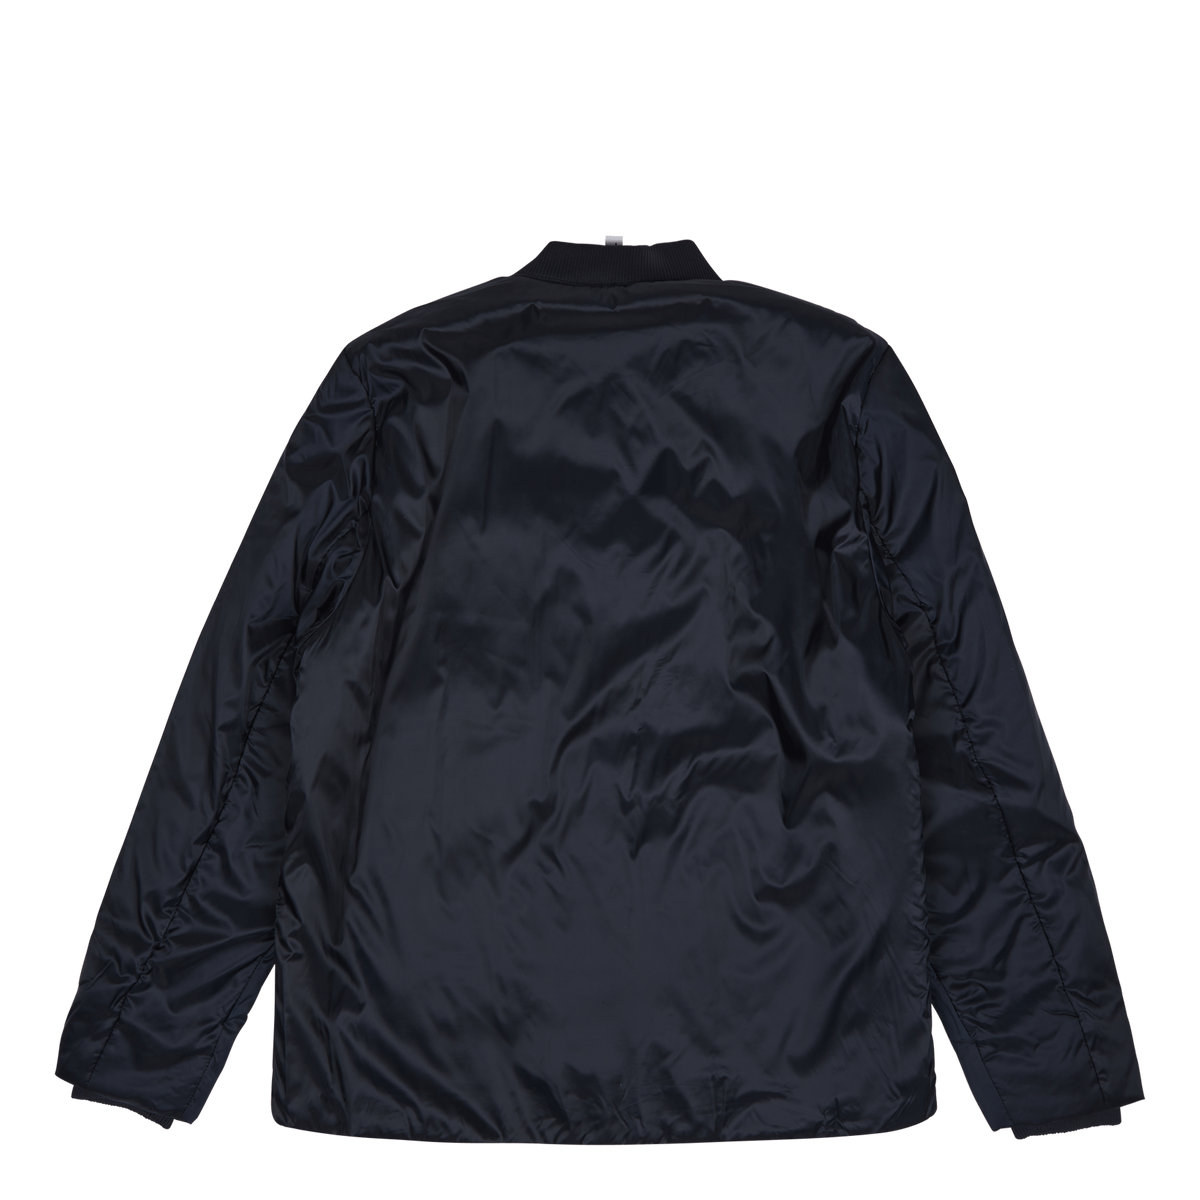 Recycled Padded Bomber Navy